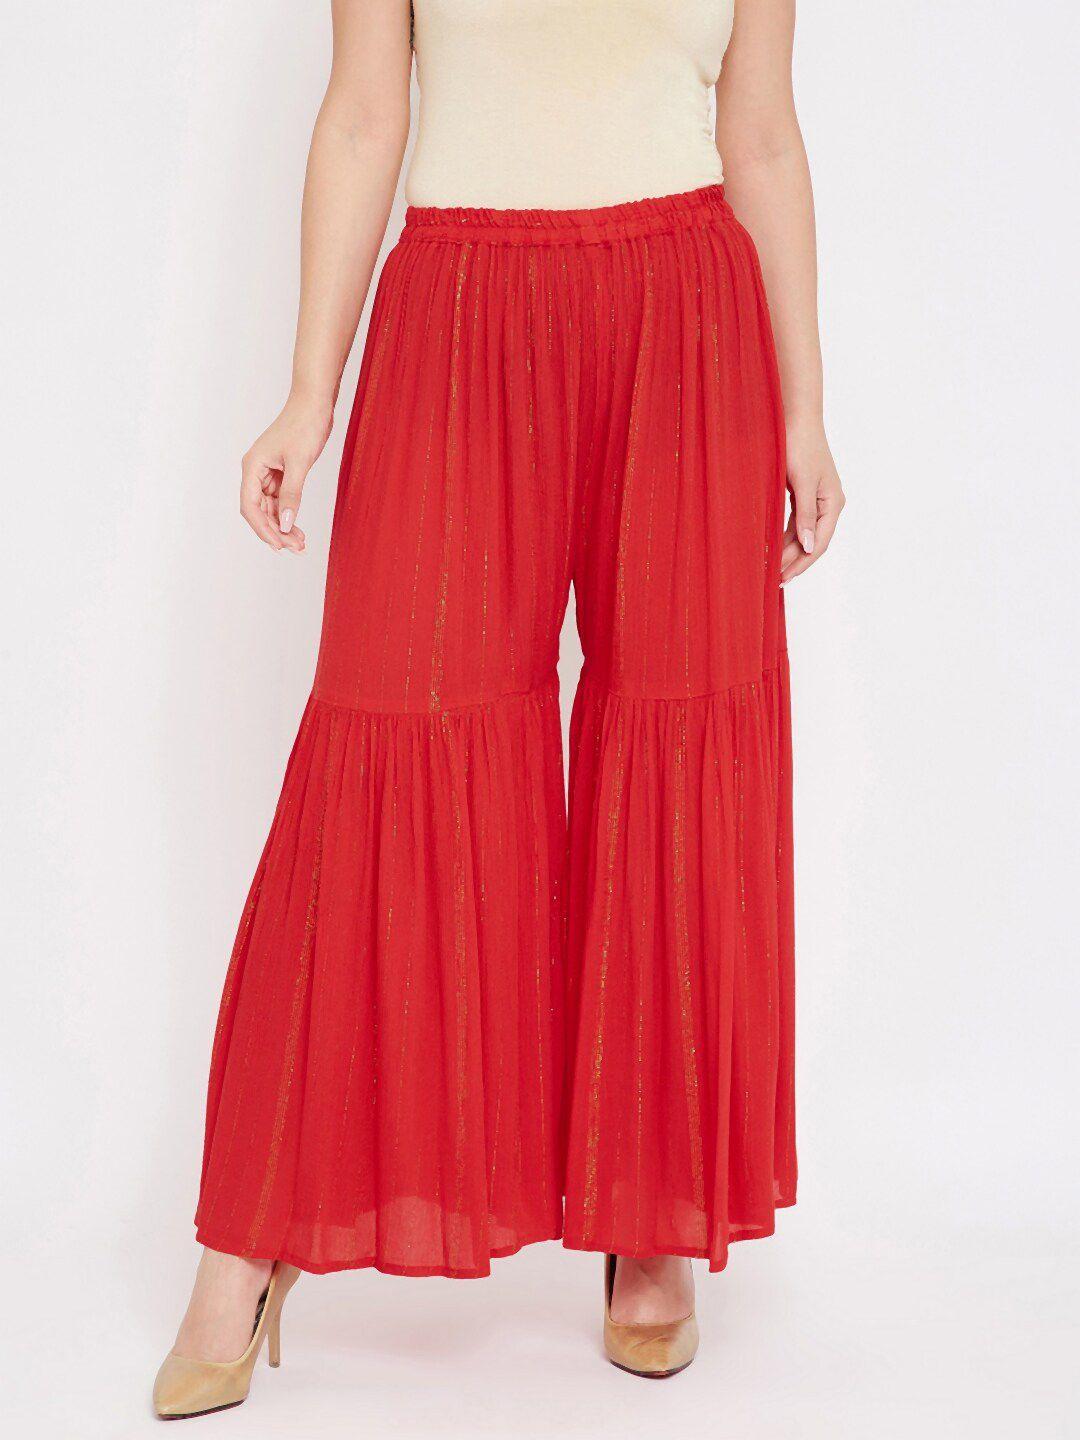 tulip-21-women-red-&-gold-toned-striped-flared-ethnic-palazzos